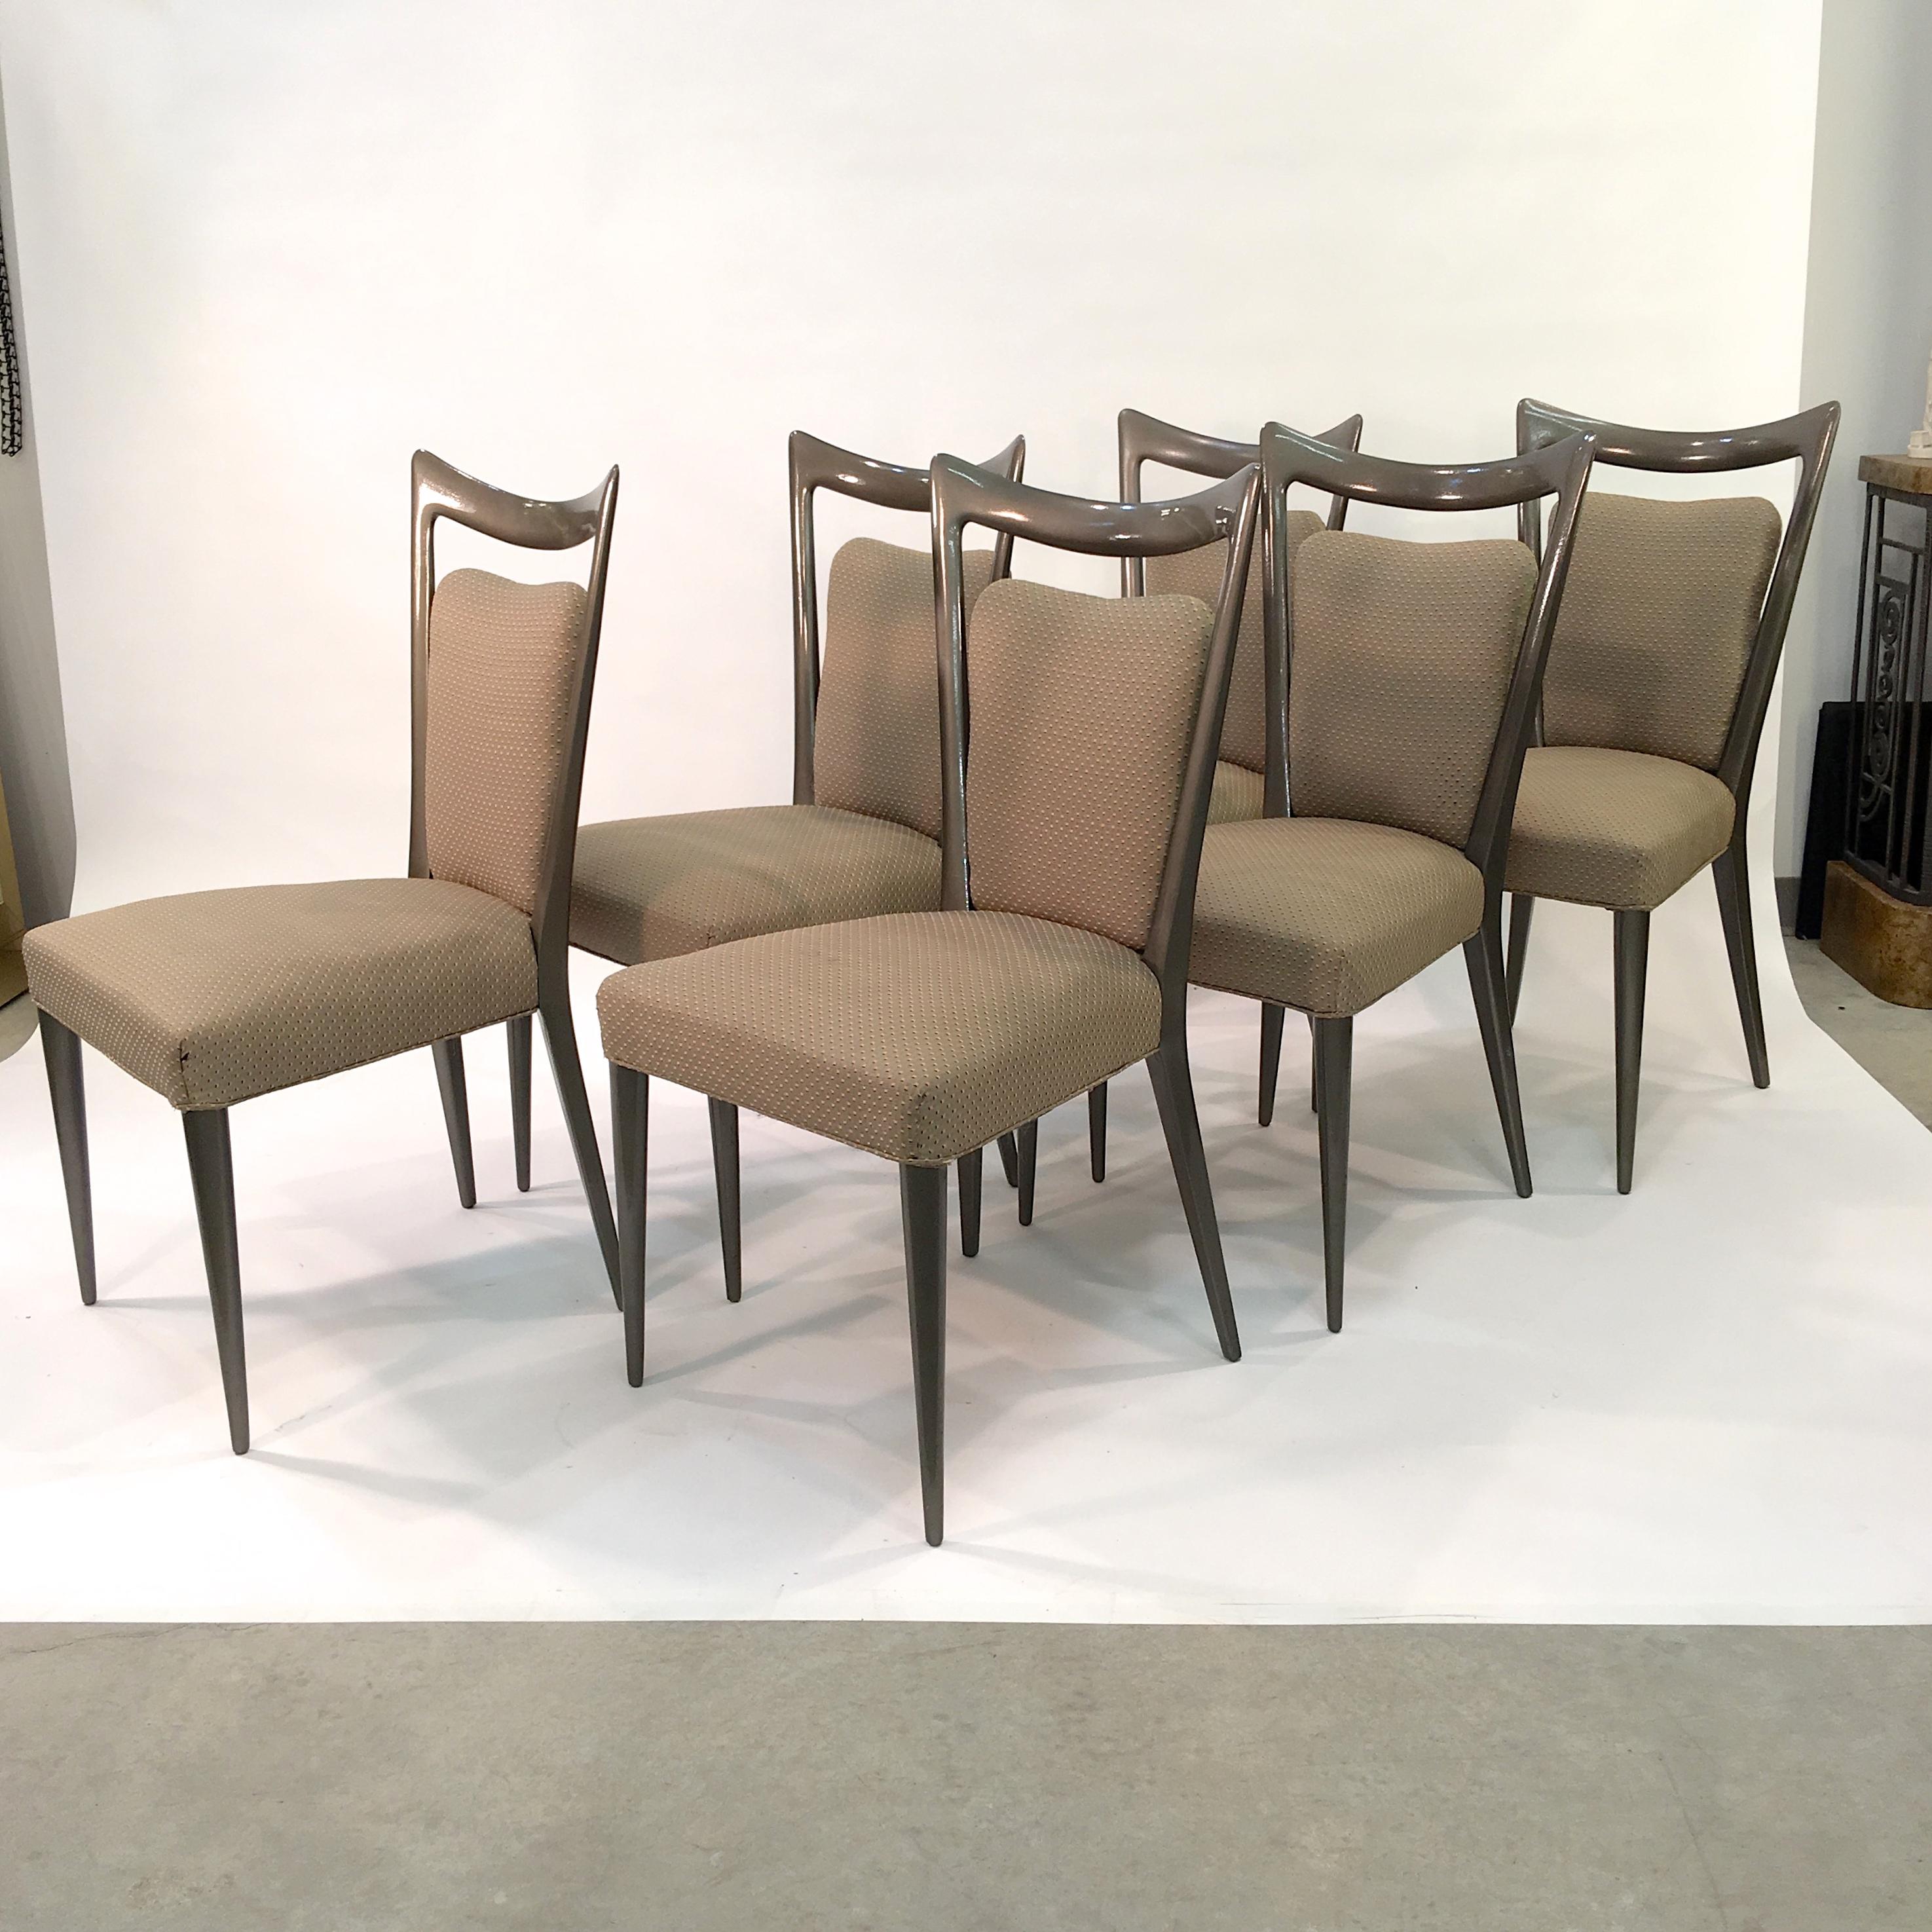 Mid-20th Century Set of Six Dining Chairs by Melchiorre Bega & Mario Gottardi